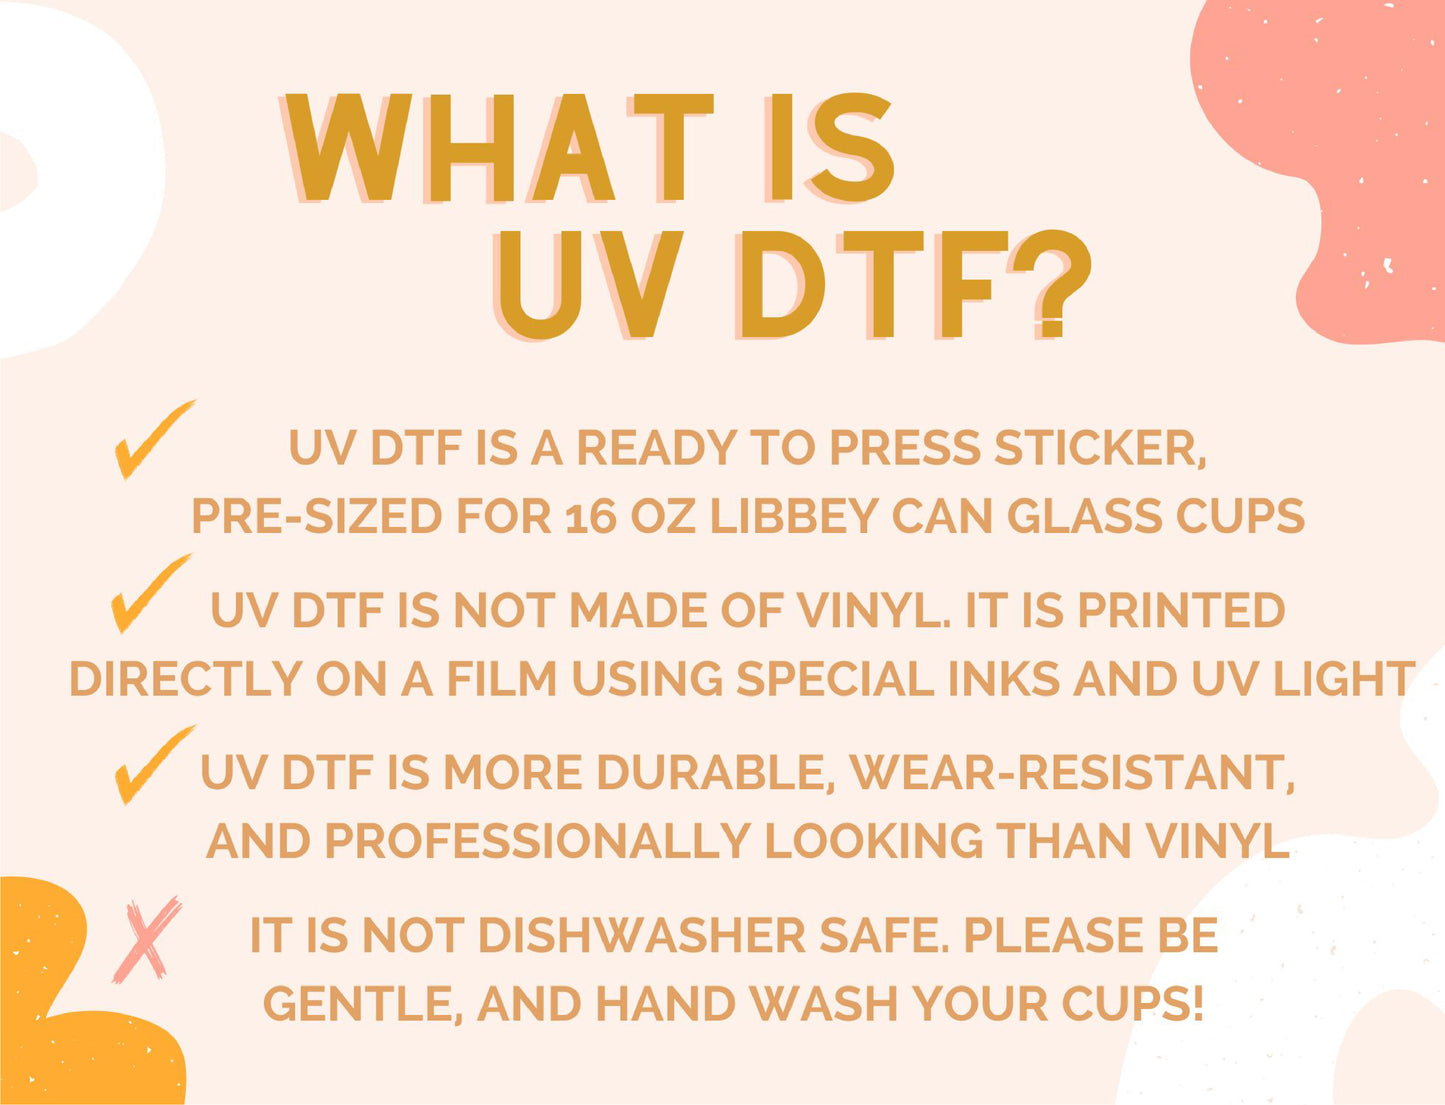 Groovy 4th Of July UV DTF WRAP